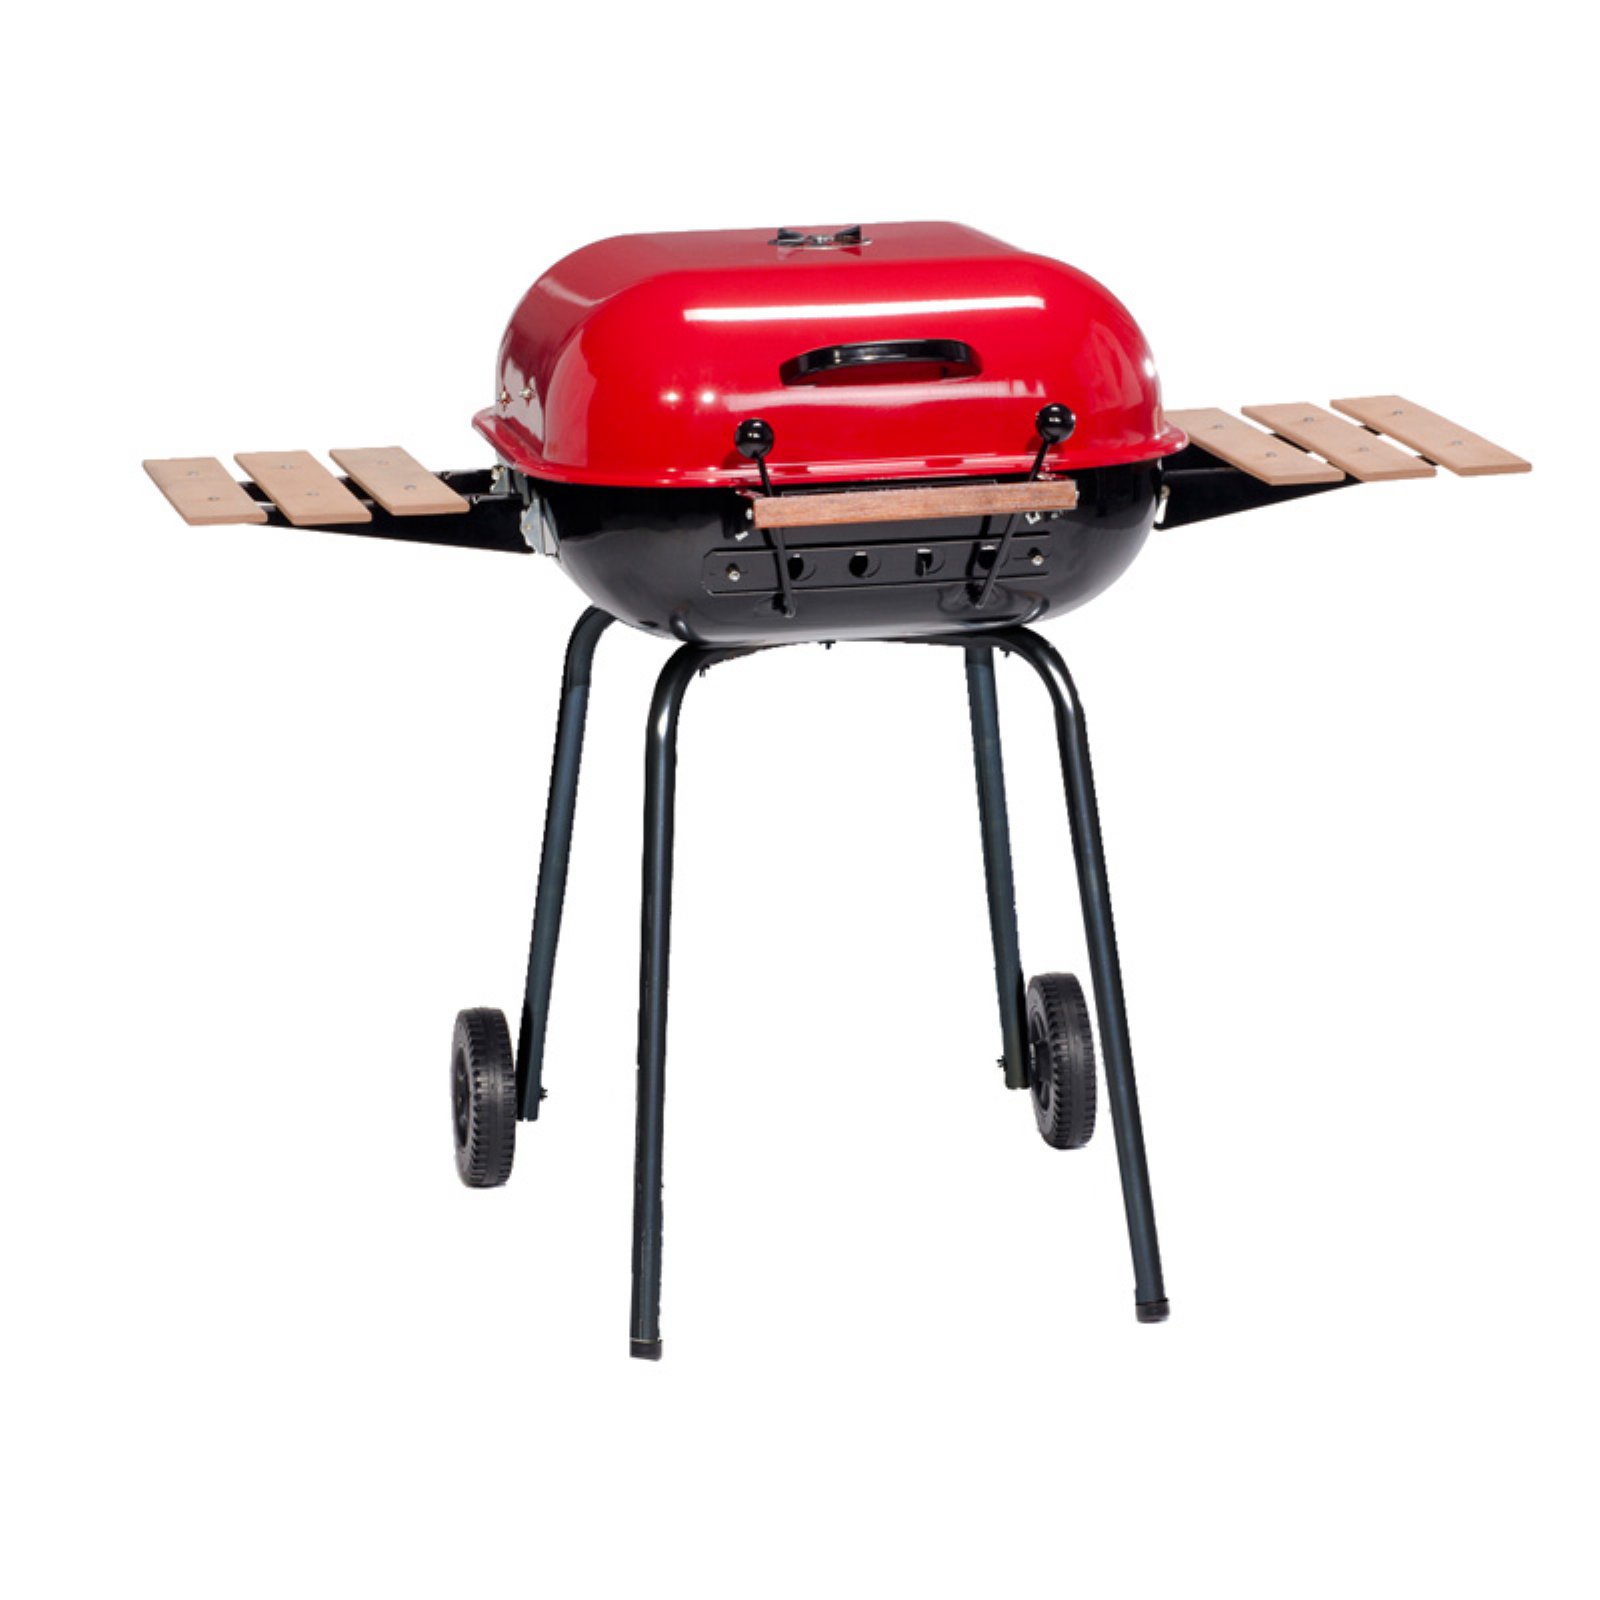 Americana Swinger 6 Position Charcoal Grill - image 4 of 8